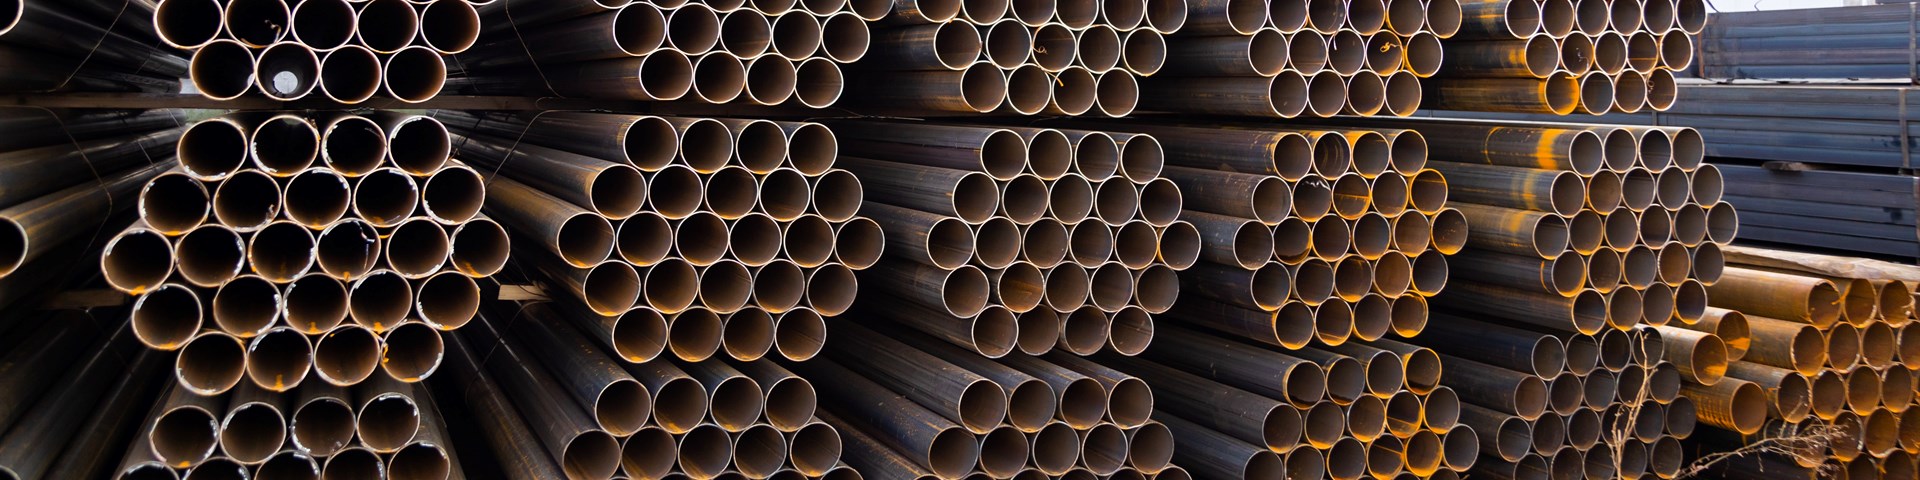 stacks of steel pipes